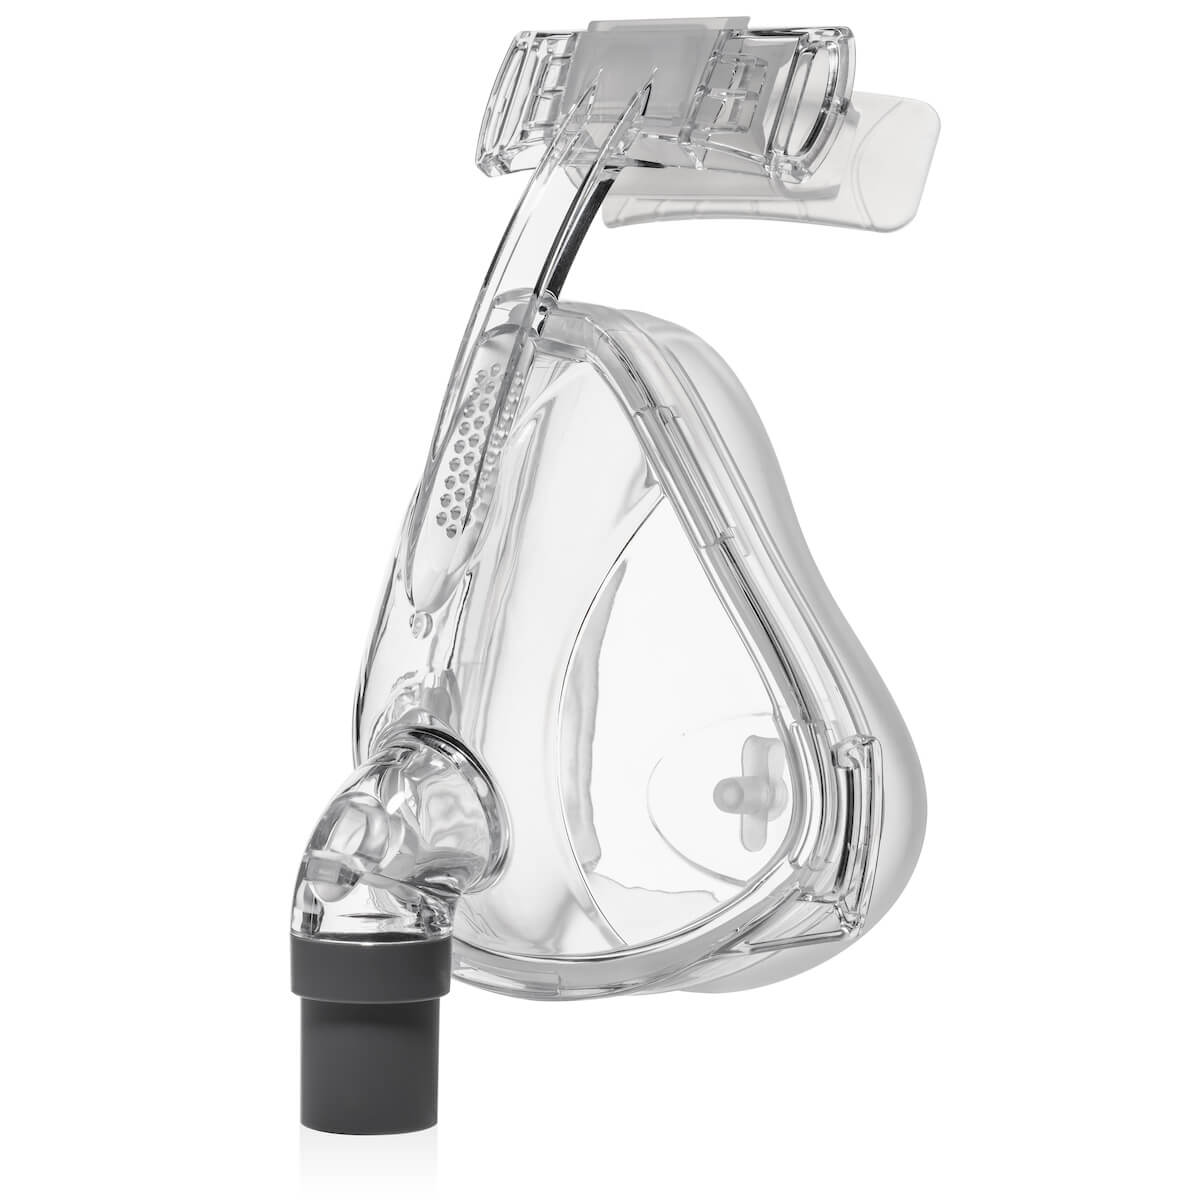 Numa Full Face Mask with tube connector by 3B Medical.